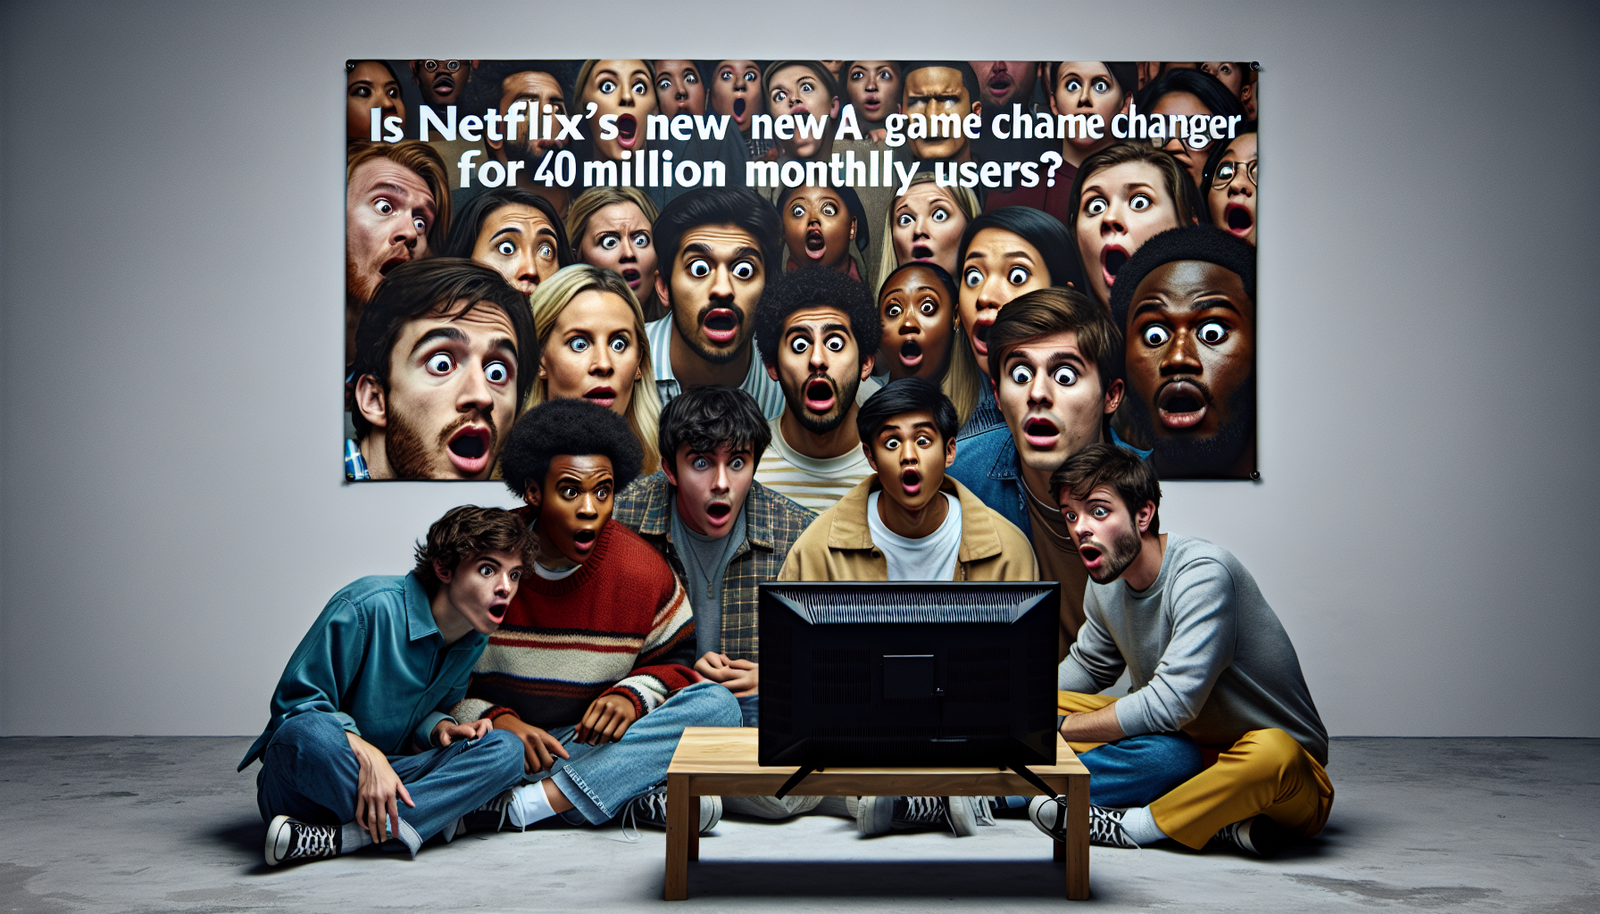 find out if netflix's new ad tier can be the ultimate game changer for 40 million monthly users. discover the potential impact of this new feature and its significance for netflix users.